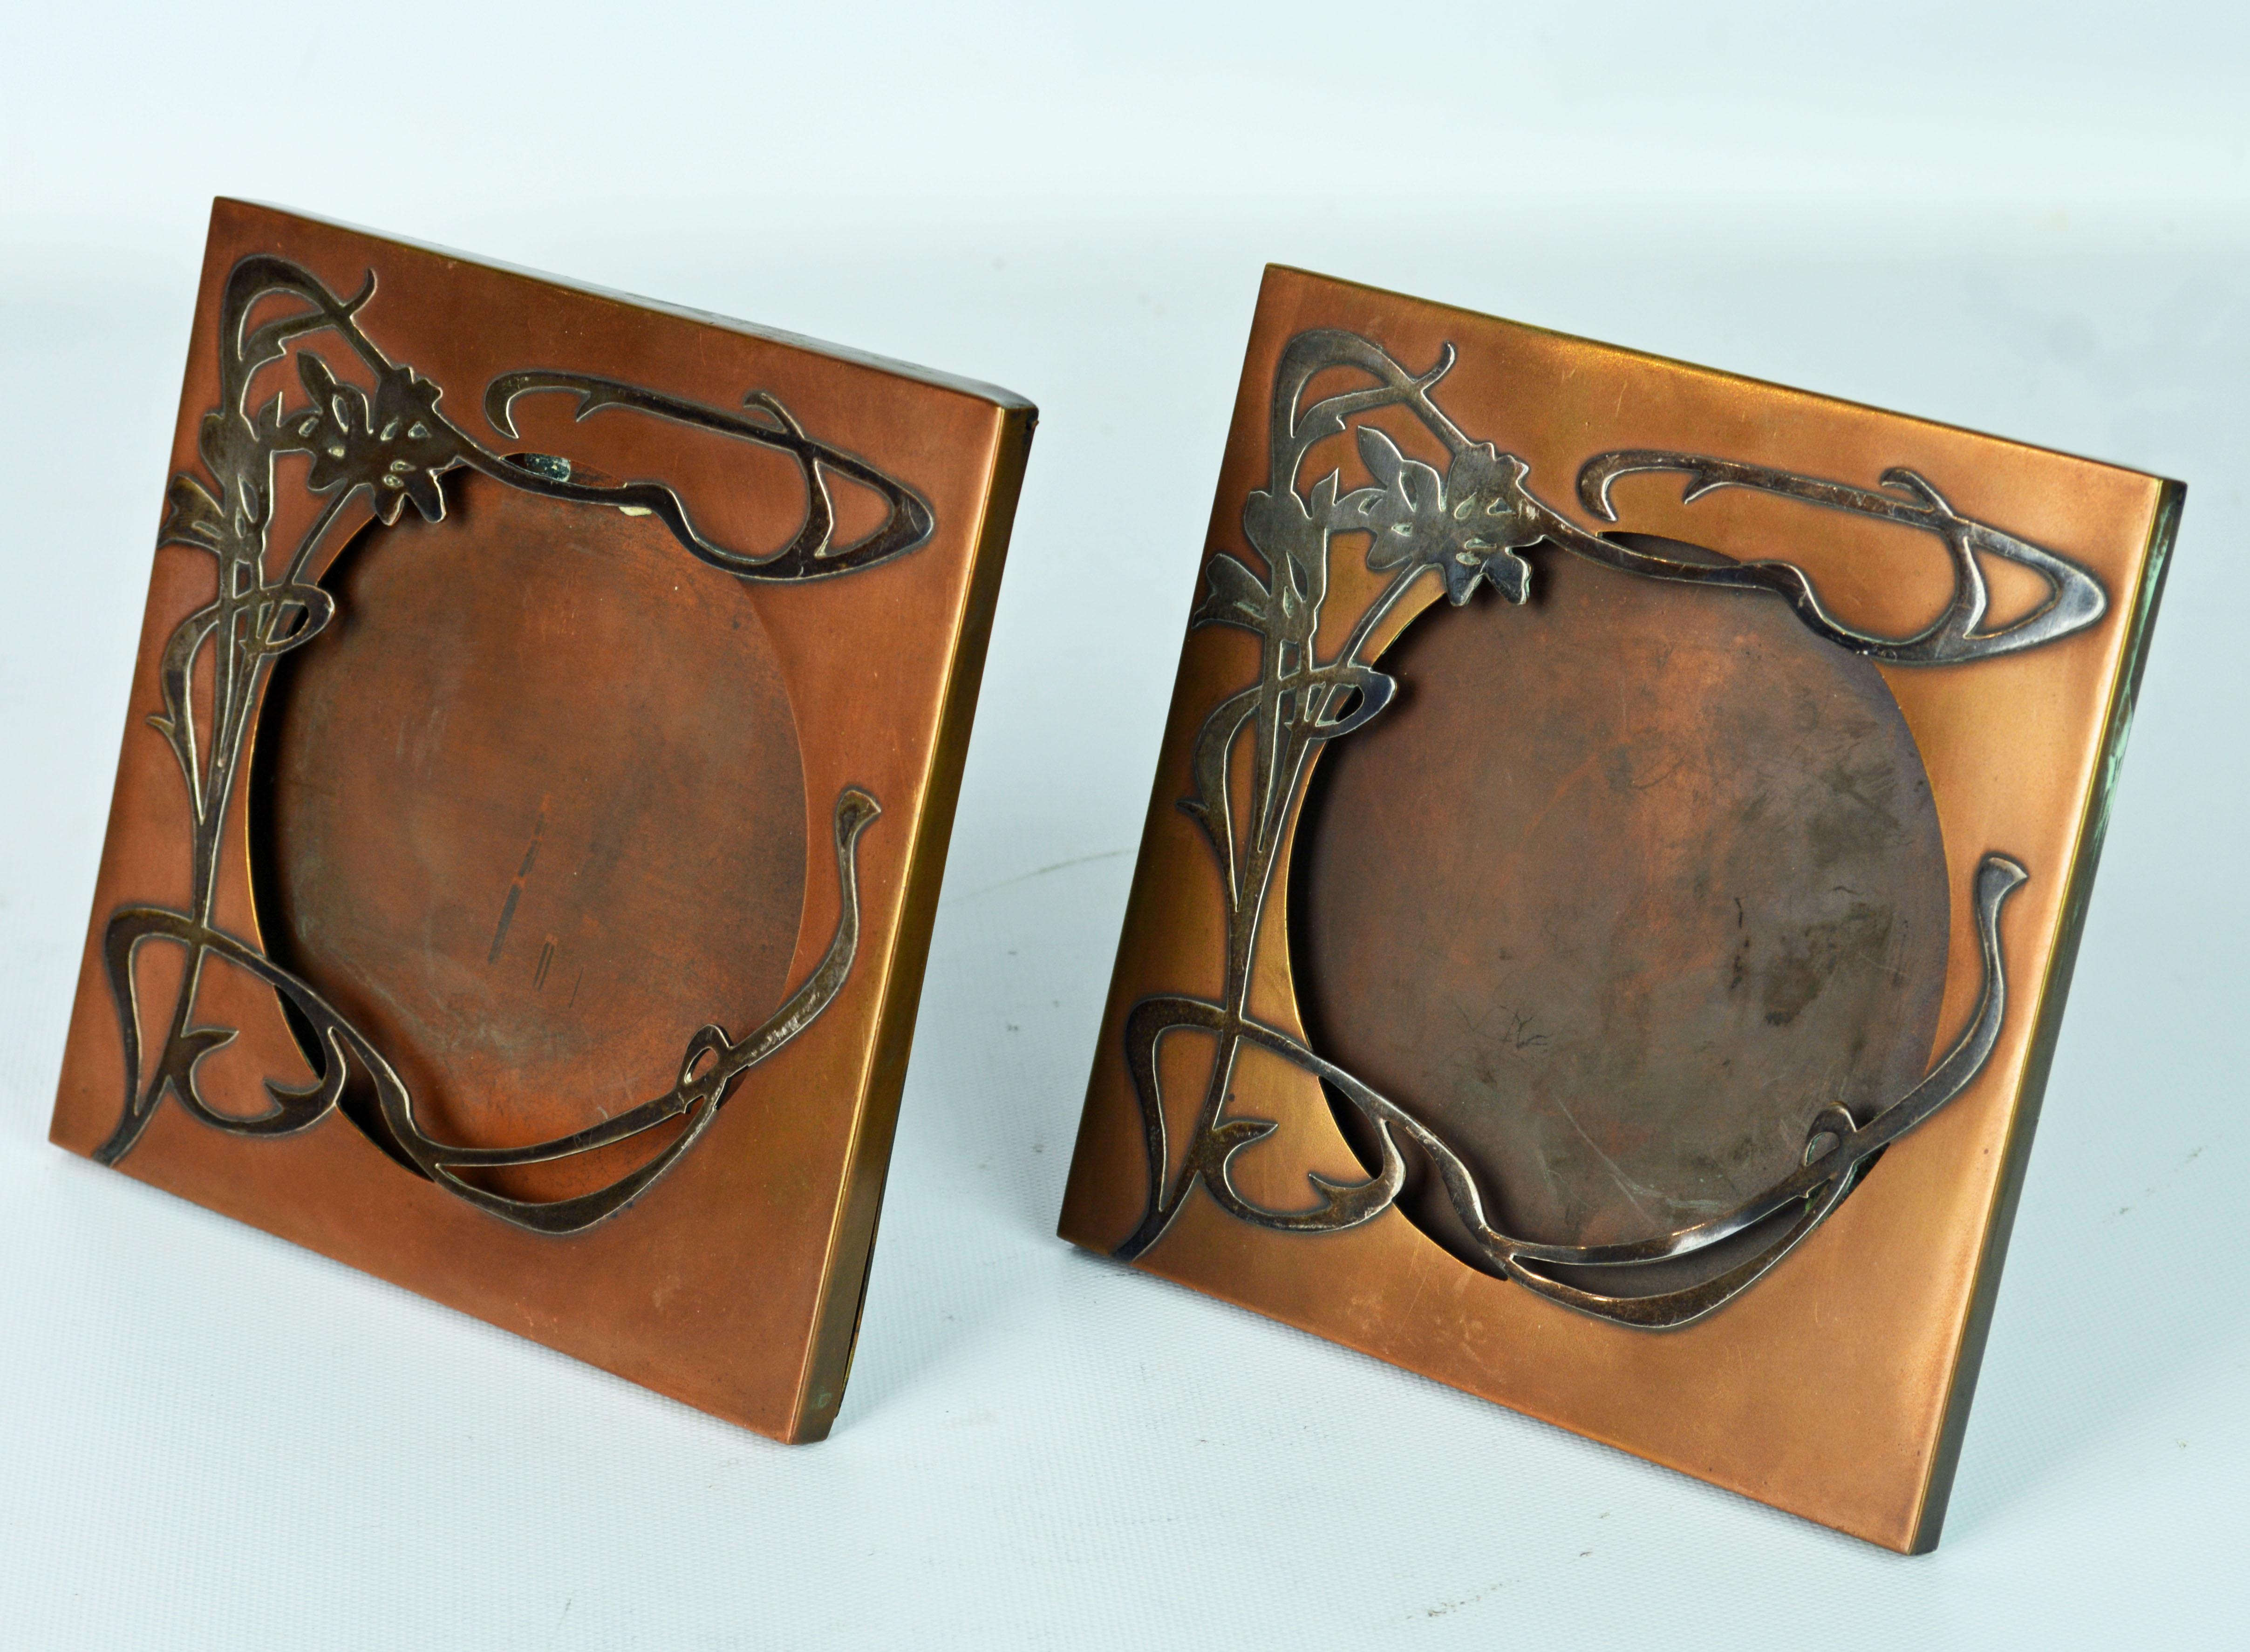 Dating to the early 20th century these exceptional art nouveau photo frames feature beautifully crafted sterling silver overlay on a patinated bronze background. Both frames are branded on the back with the Heintz logo mark.